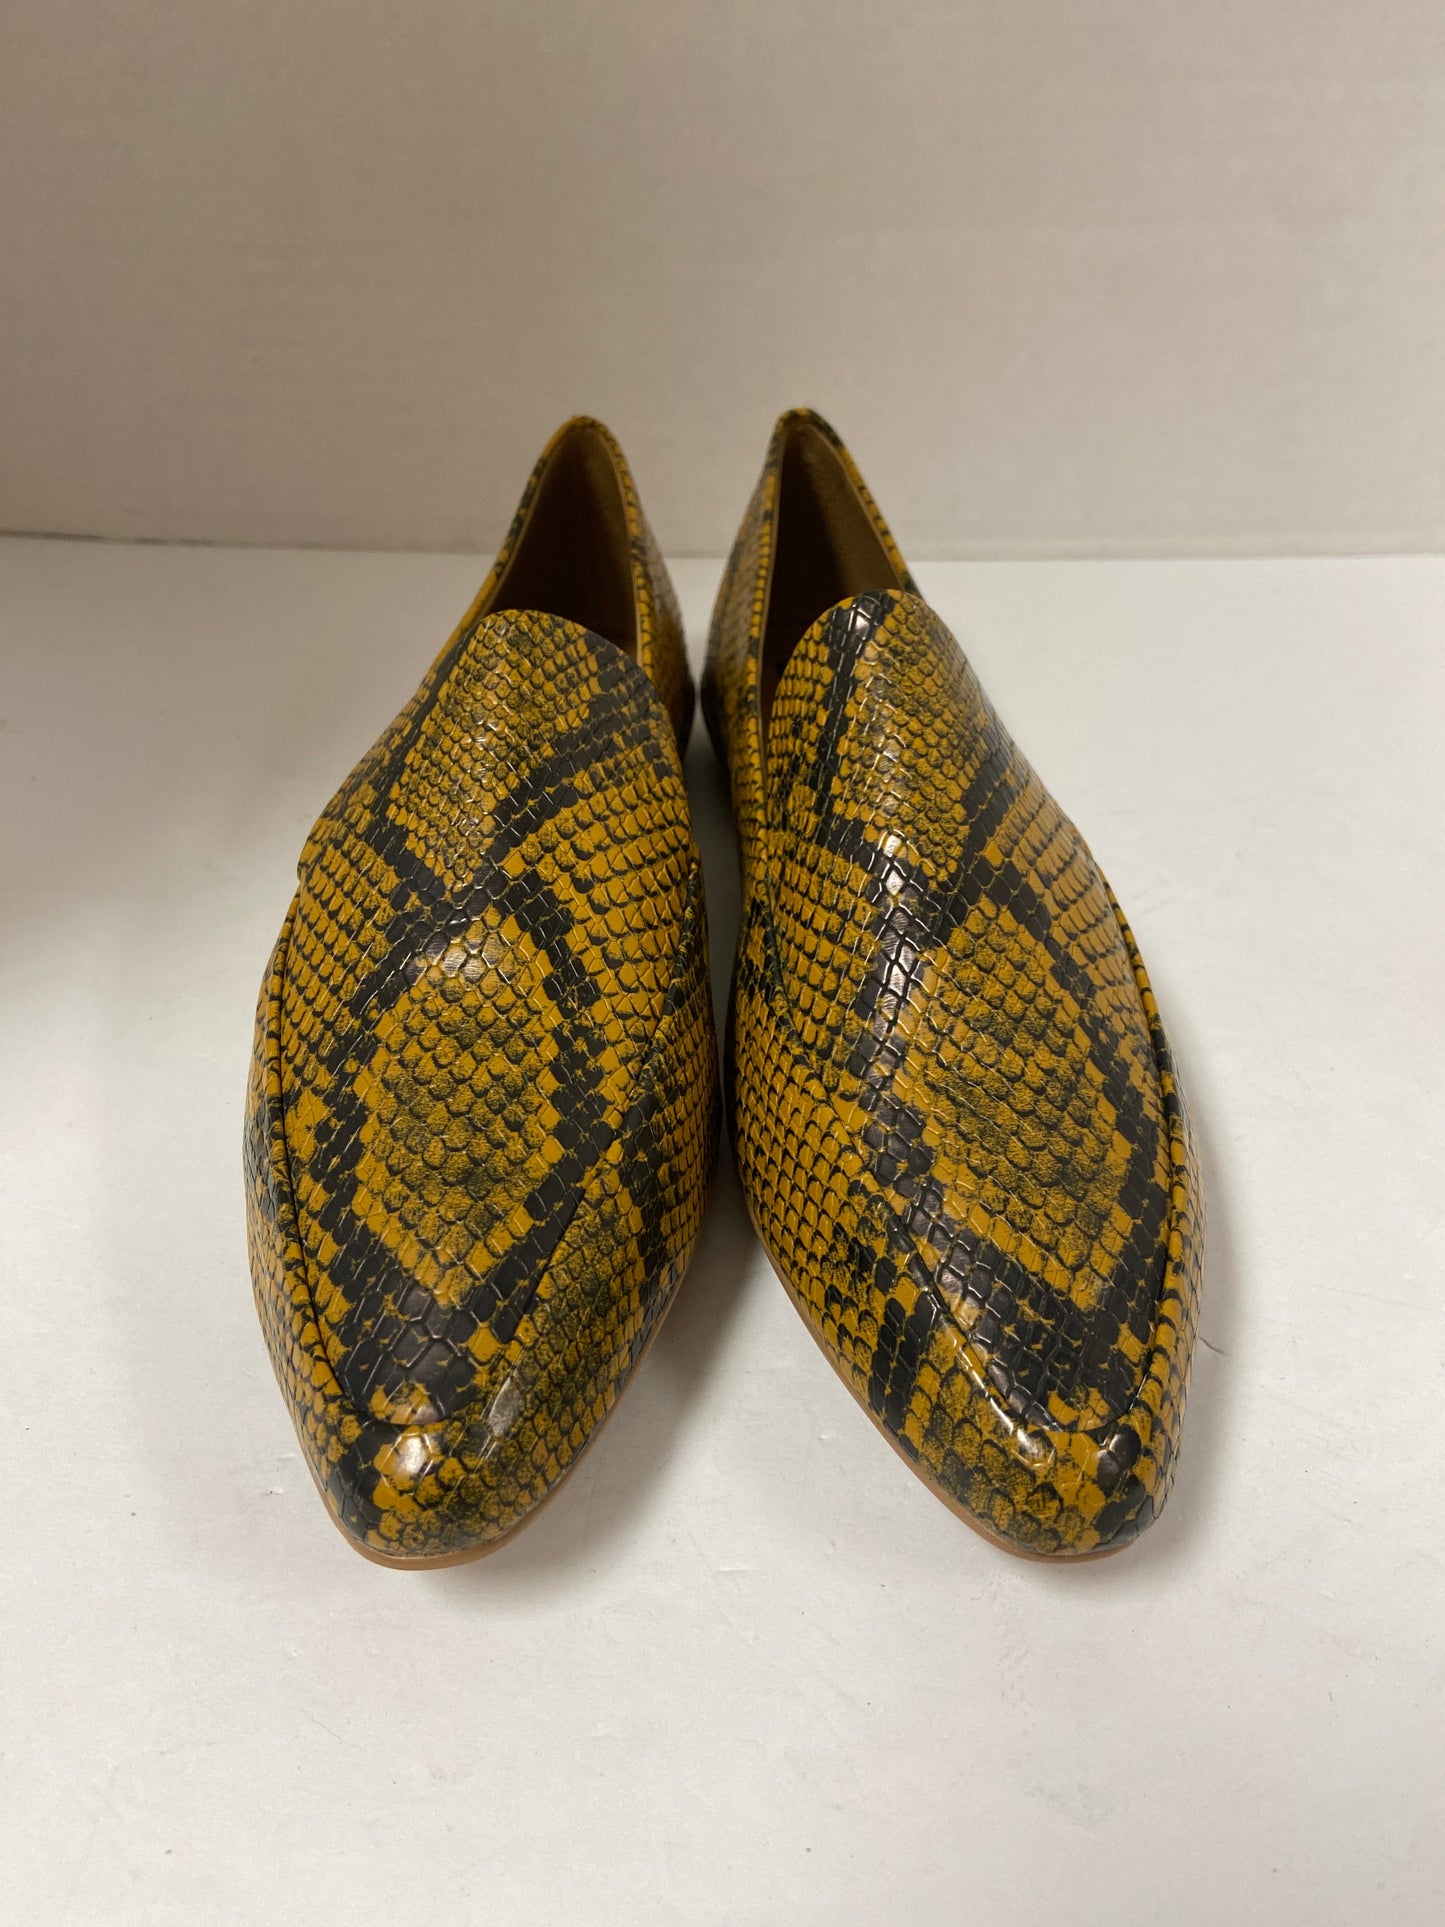 Shoes Flats Loafer Oxford By Steve Madden  Size: 6